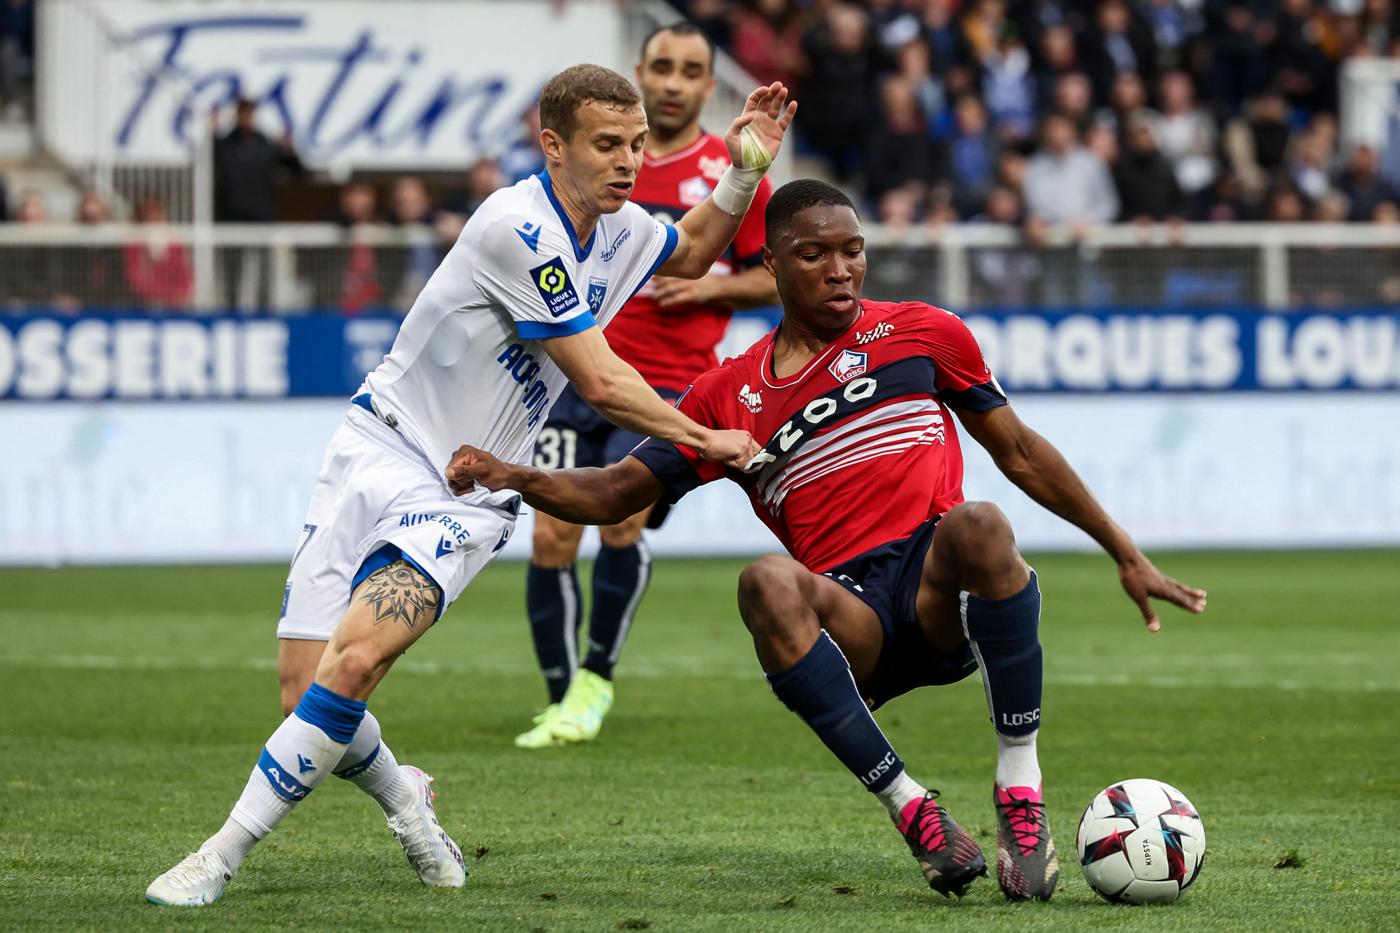 Auxerre - Lille - 1:1. French Championship, round of 32. Match Review, Statistics